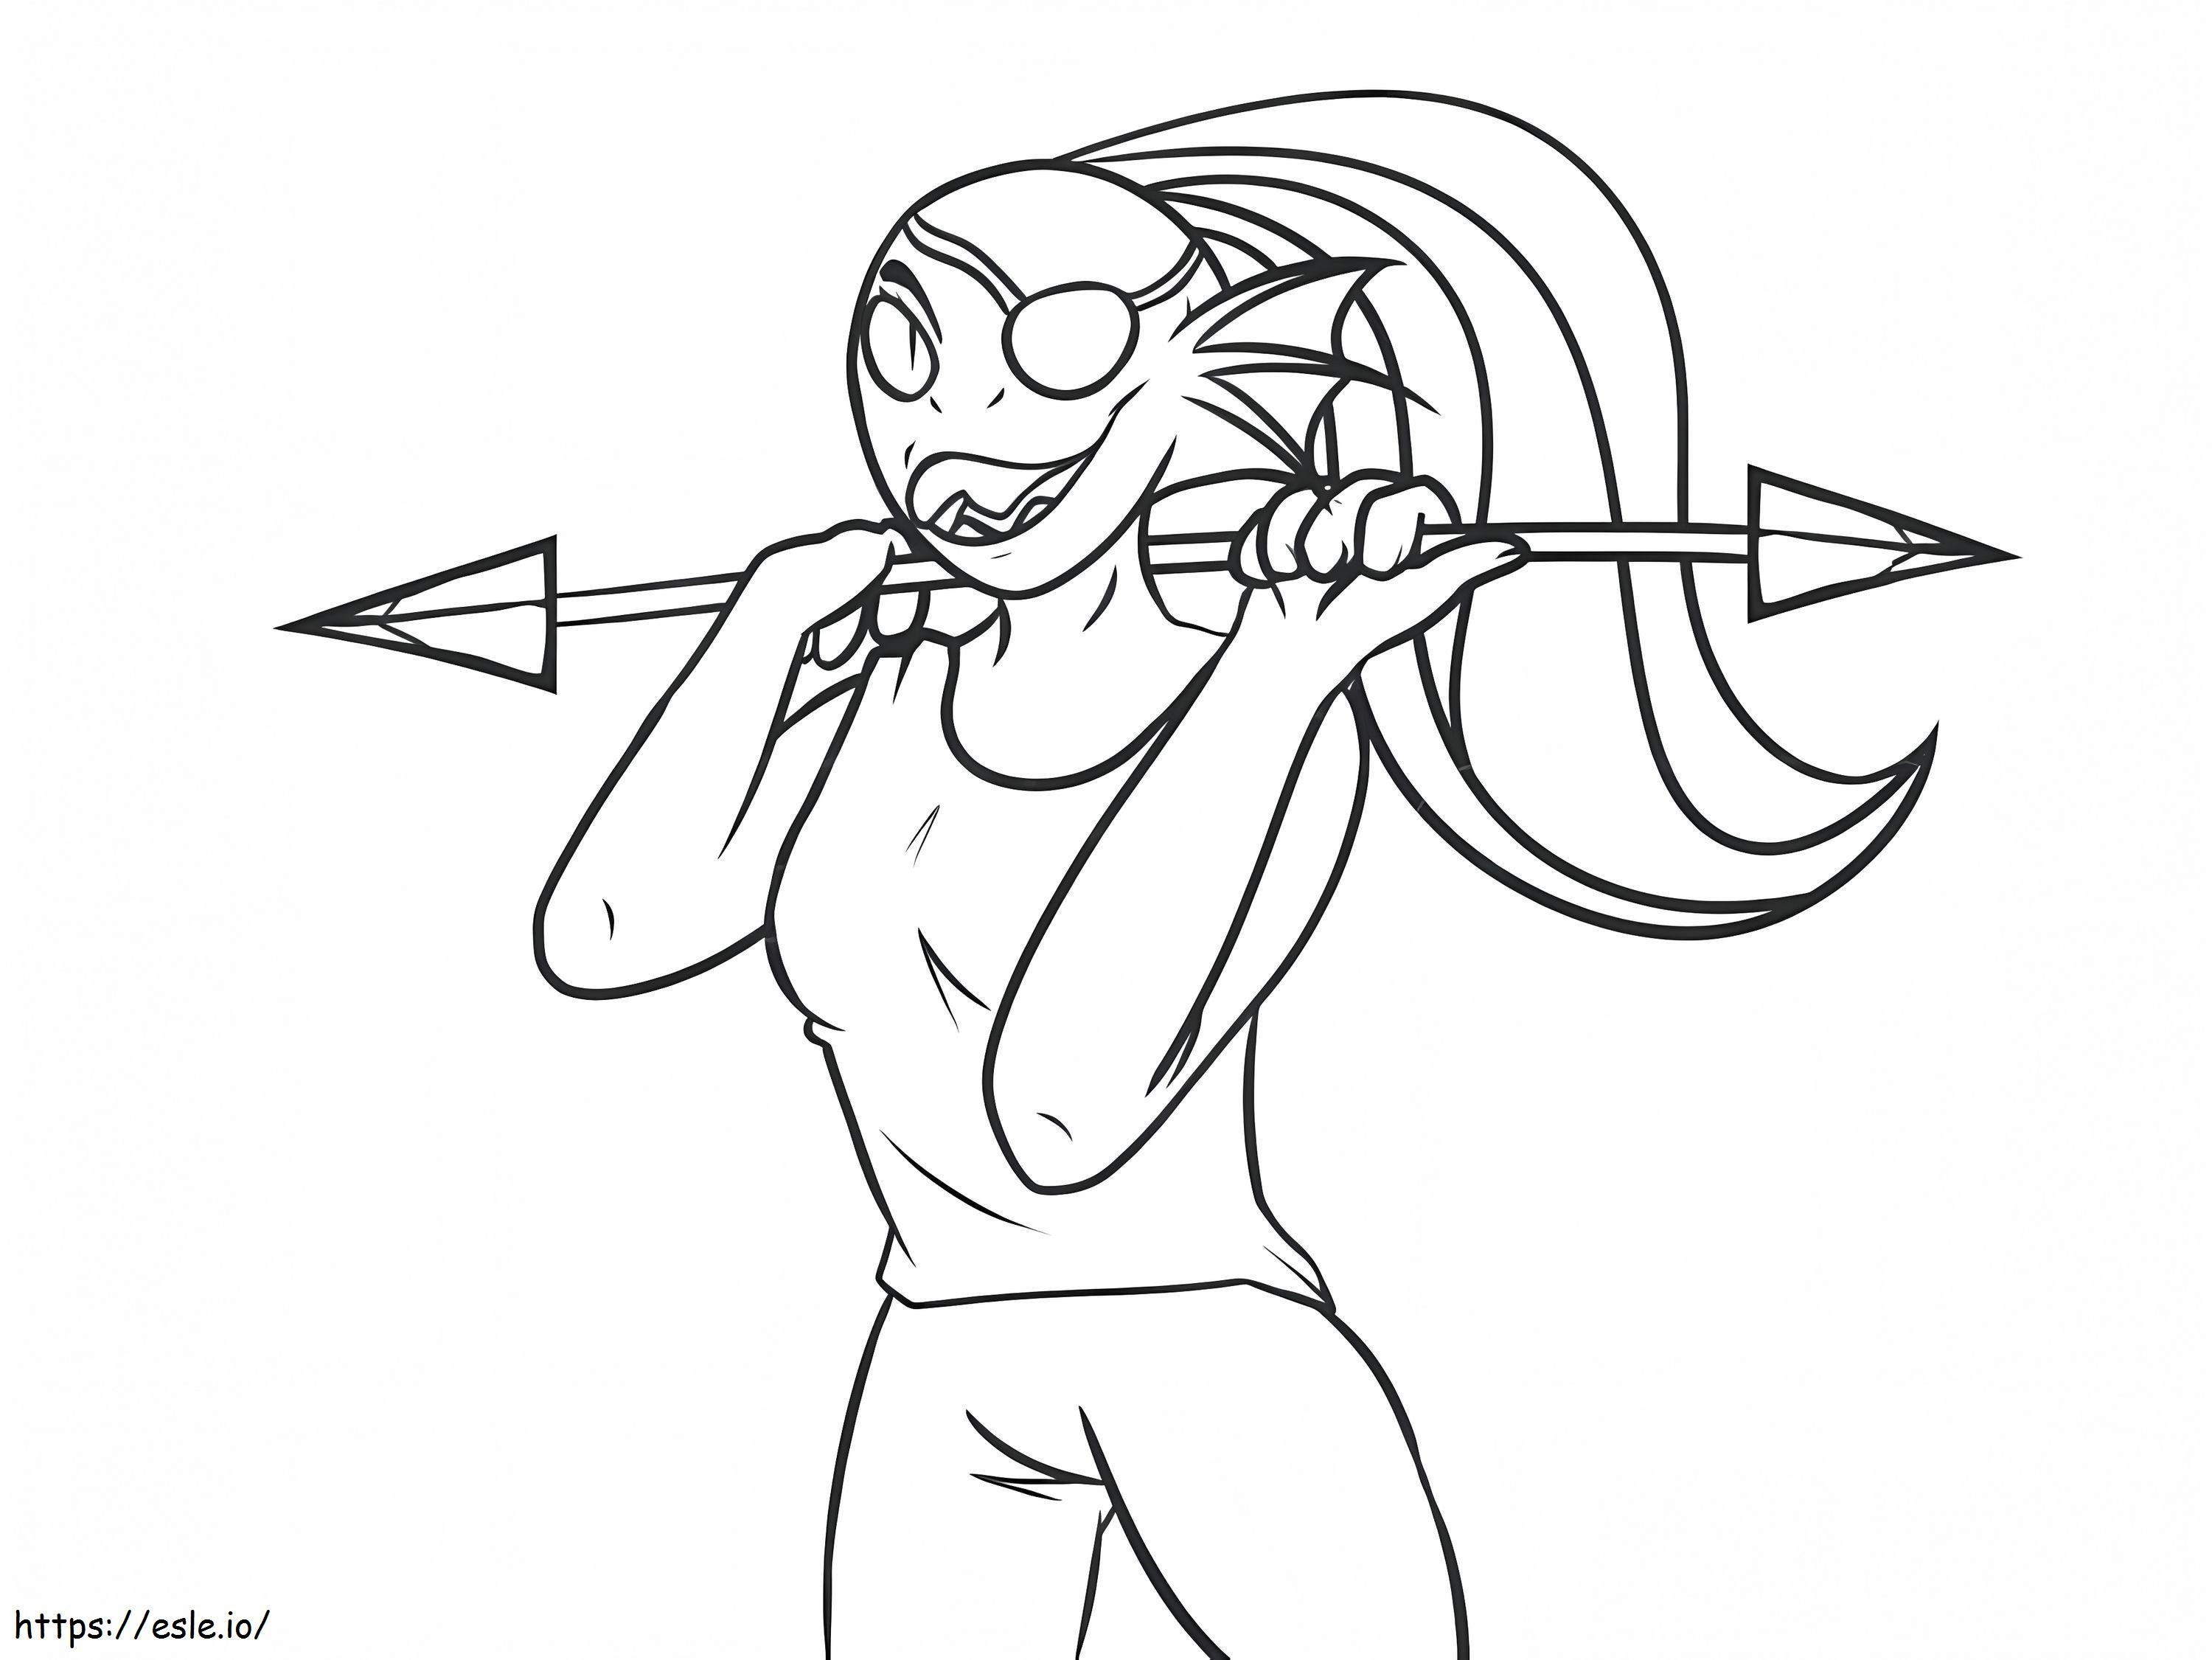 Undertale Undyne coloring page